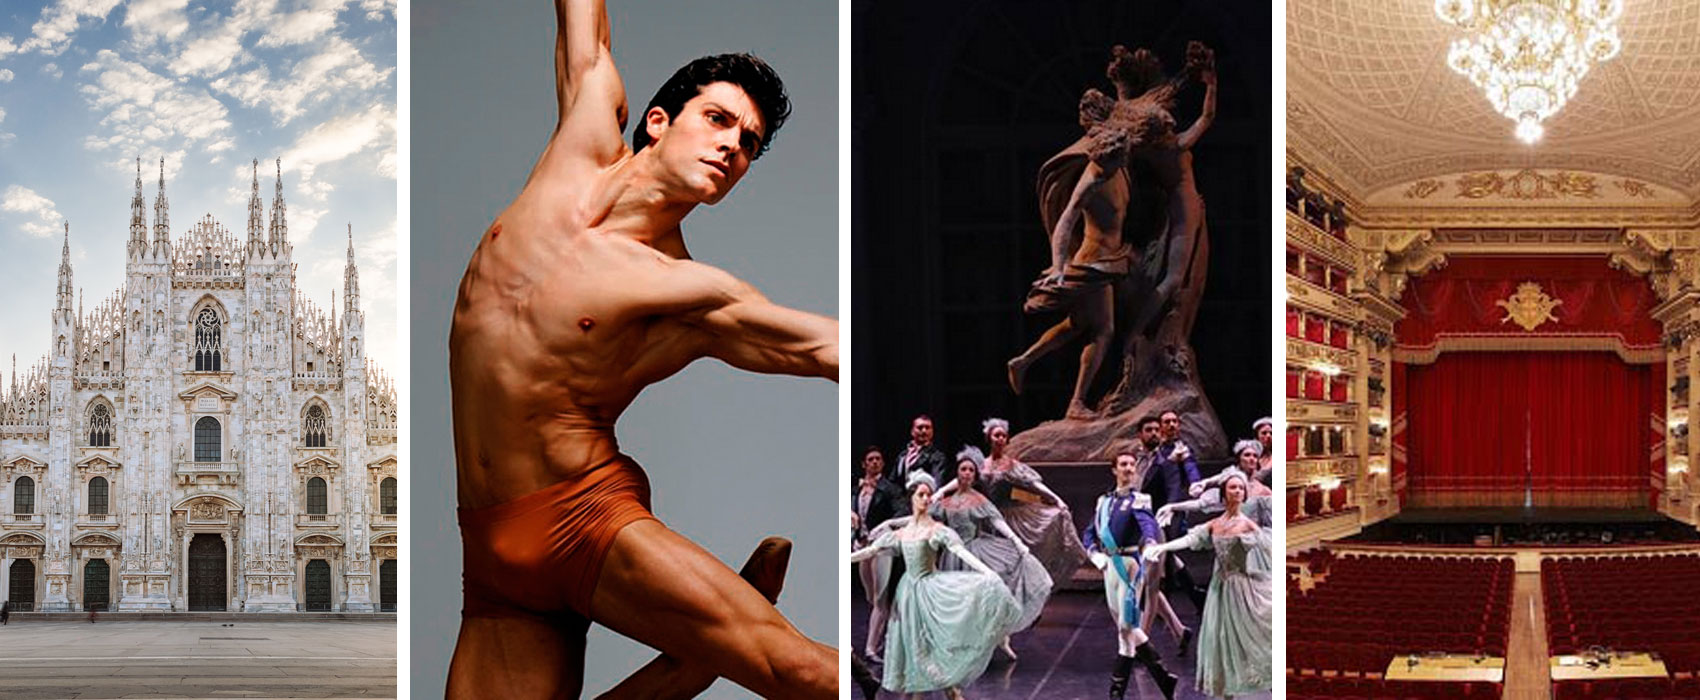 Milan from 16/11 to 18/11 : The divine Roberto Bolle dances Onegin